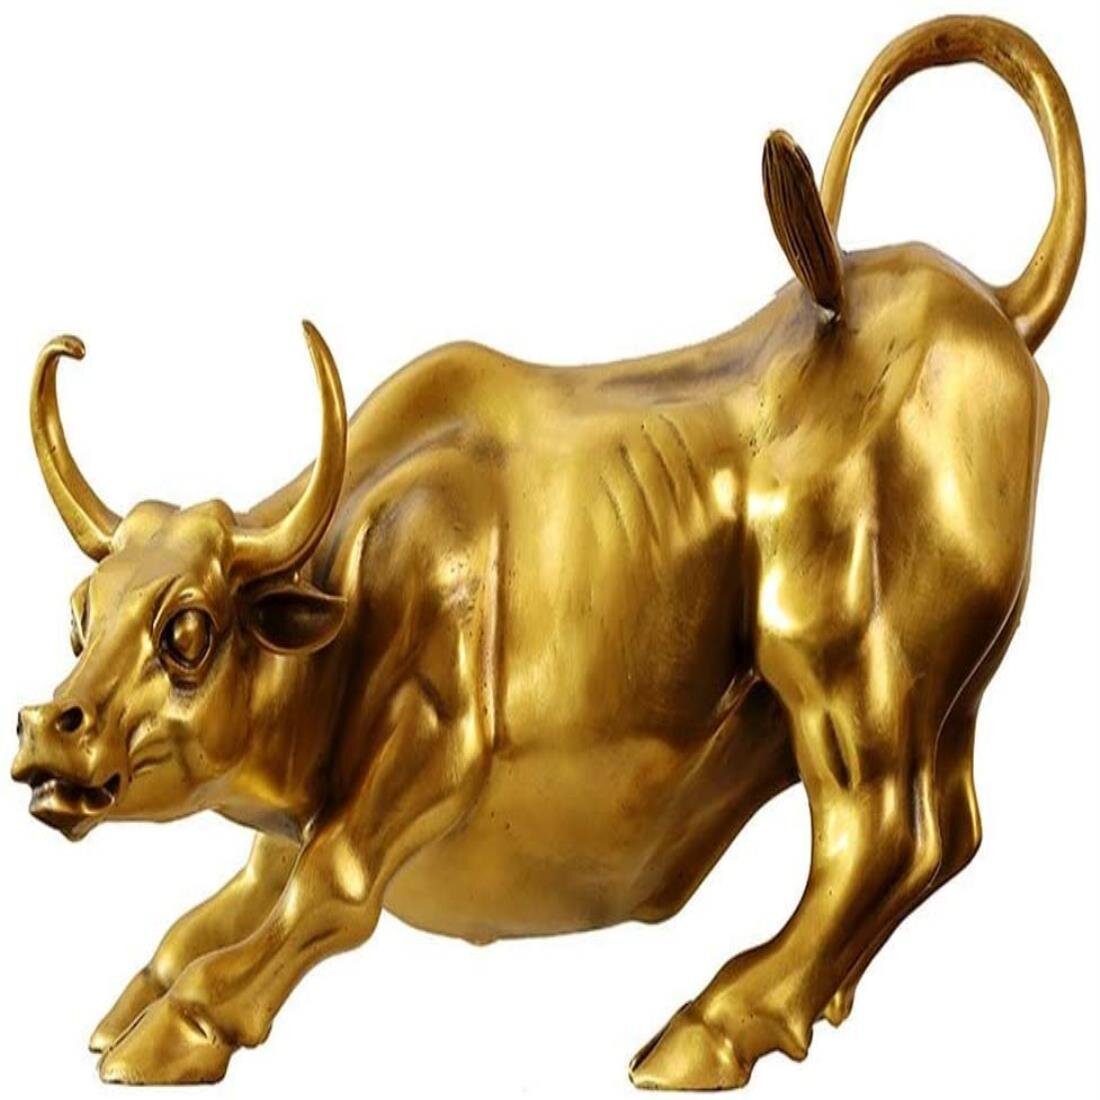 Symbol of Career and Wealth Cow Figure Statues Ox Sculptures for Home Living Room Office Decoration Wall Street Bull Art Decor Brass Bull Statue 